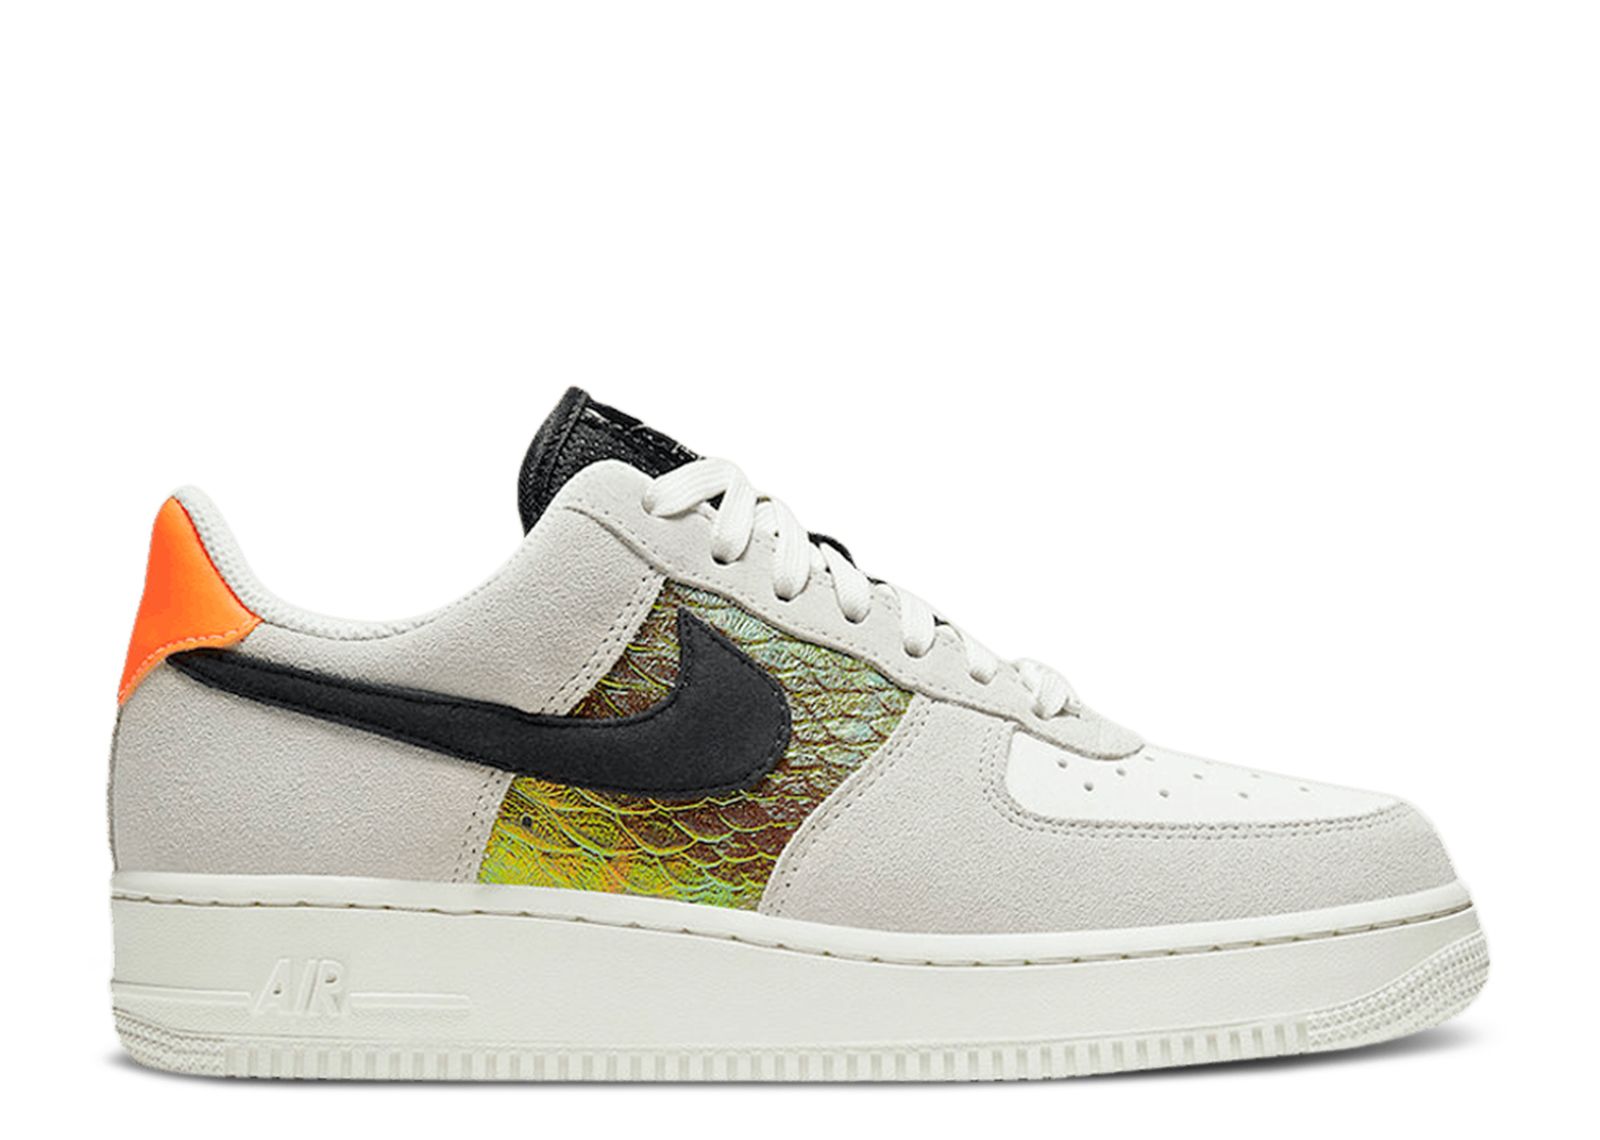 Second Chance - sail nike Air Force 1 Low Iridescent Snakeskin - 36 | NEW